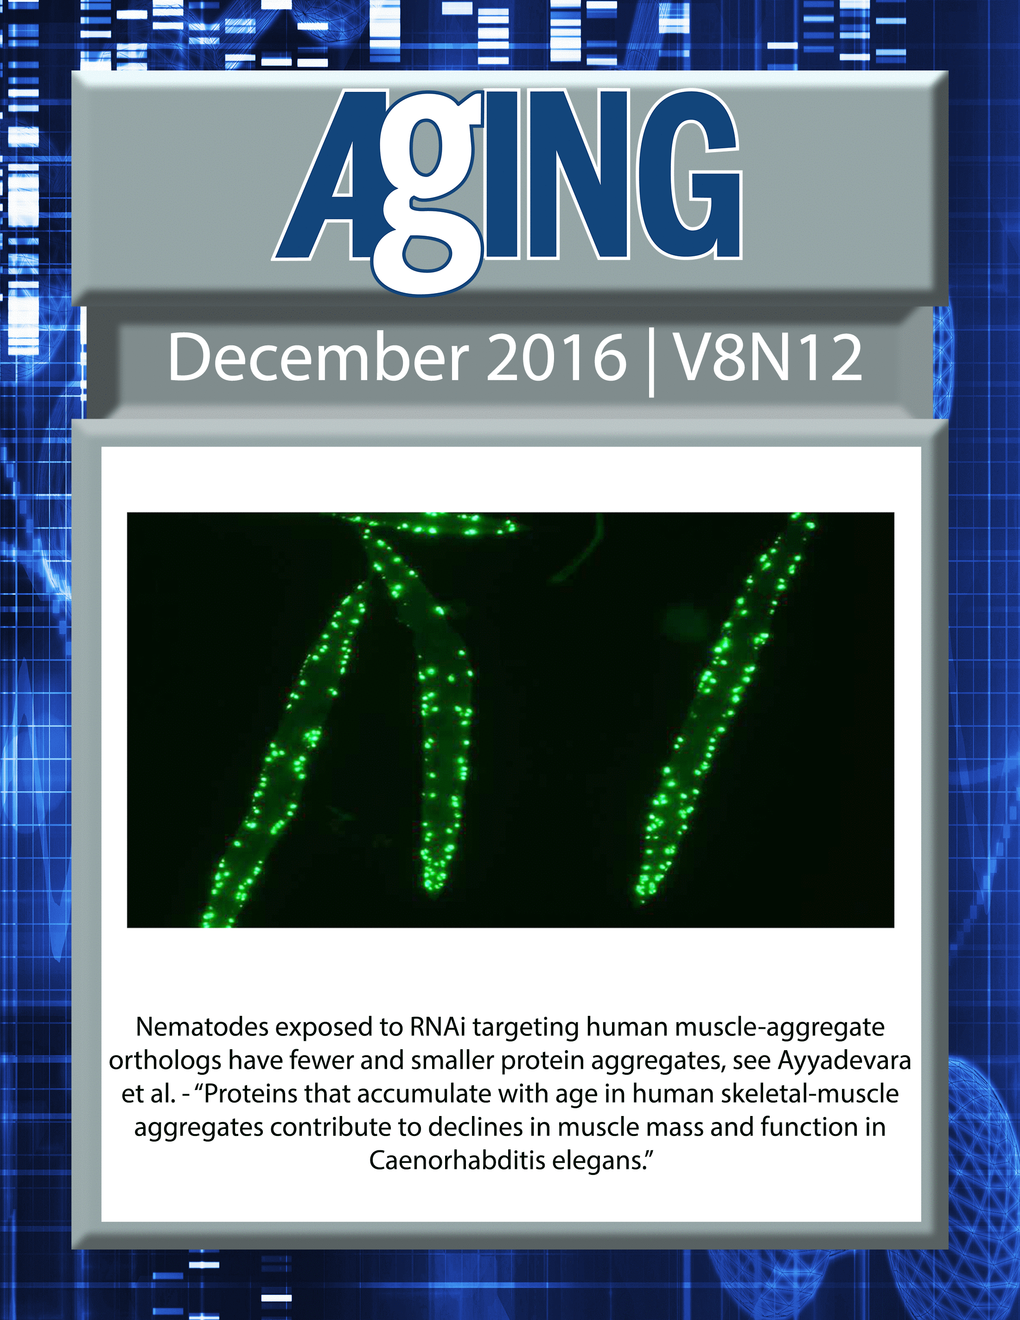 The cover for issue 12 of Aging features Figure 2B, ''Nematodes exposed to RNAi targeting human muscle-aggregate orthologs have fewer and smaller protein aggregates" from Ayyadevara et al.